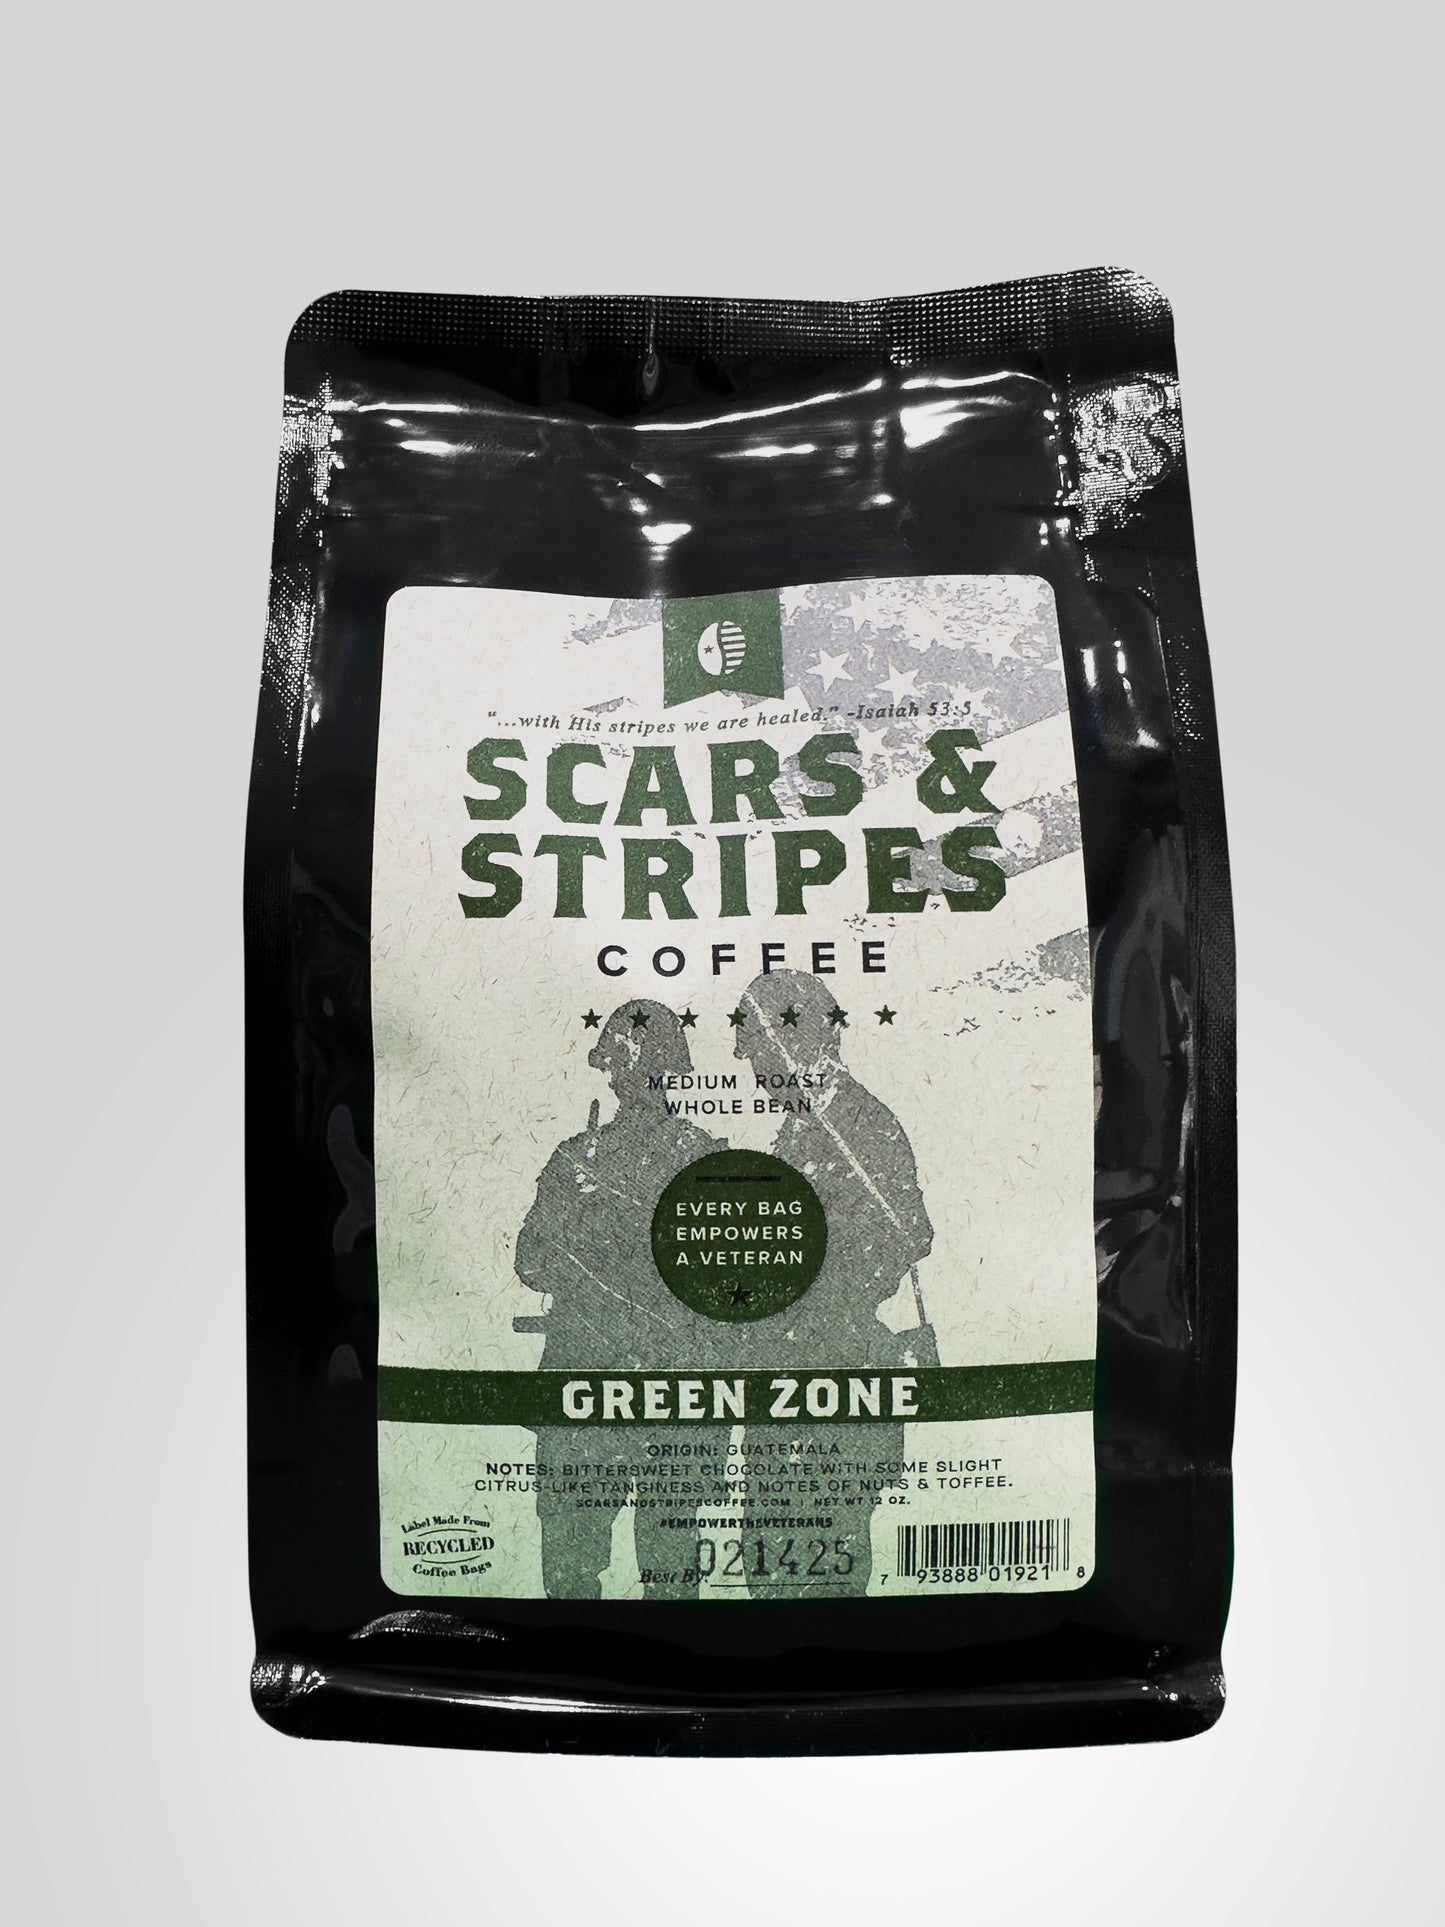 Green Zone Coffee - Prices Vary by Size